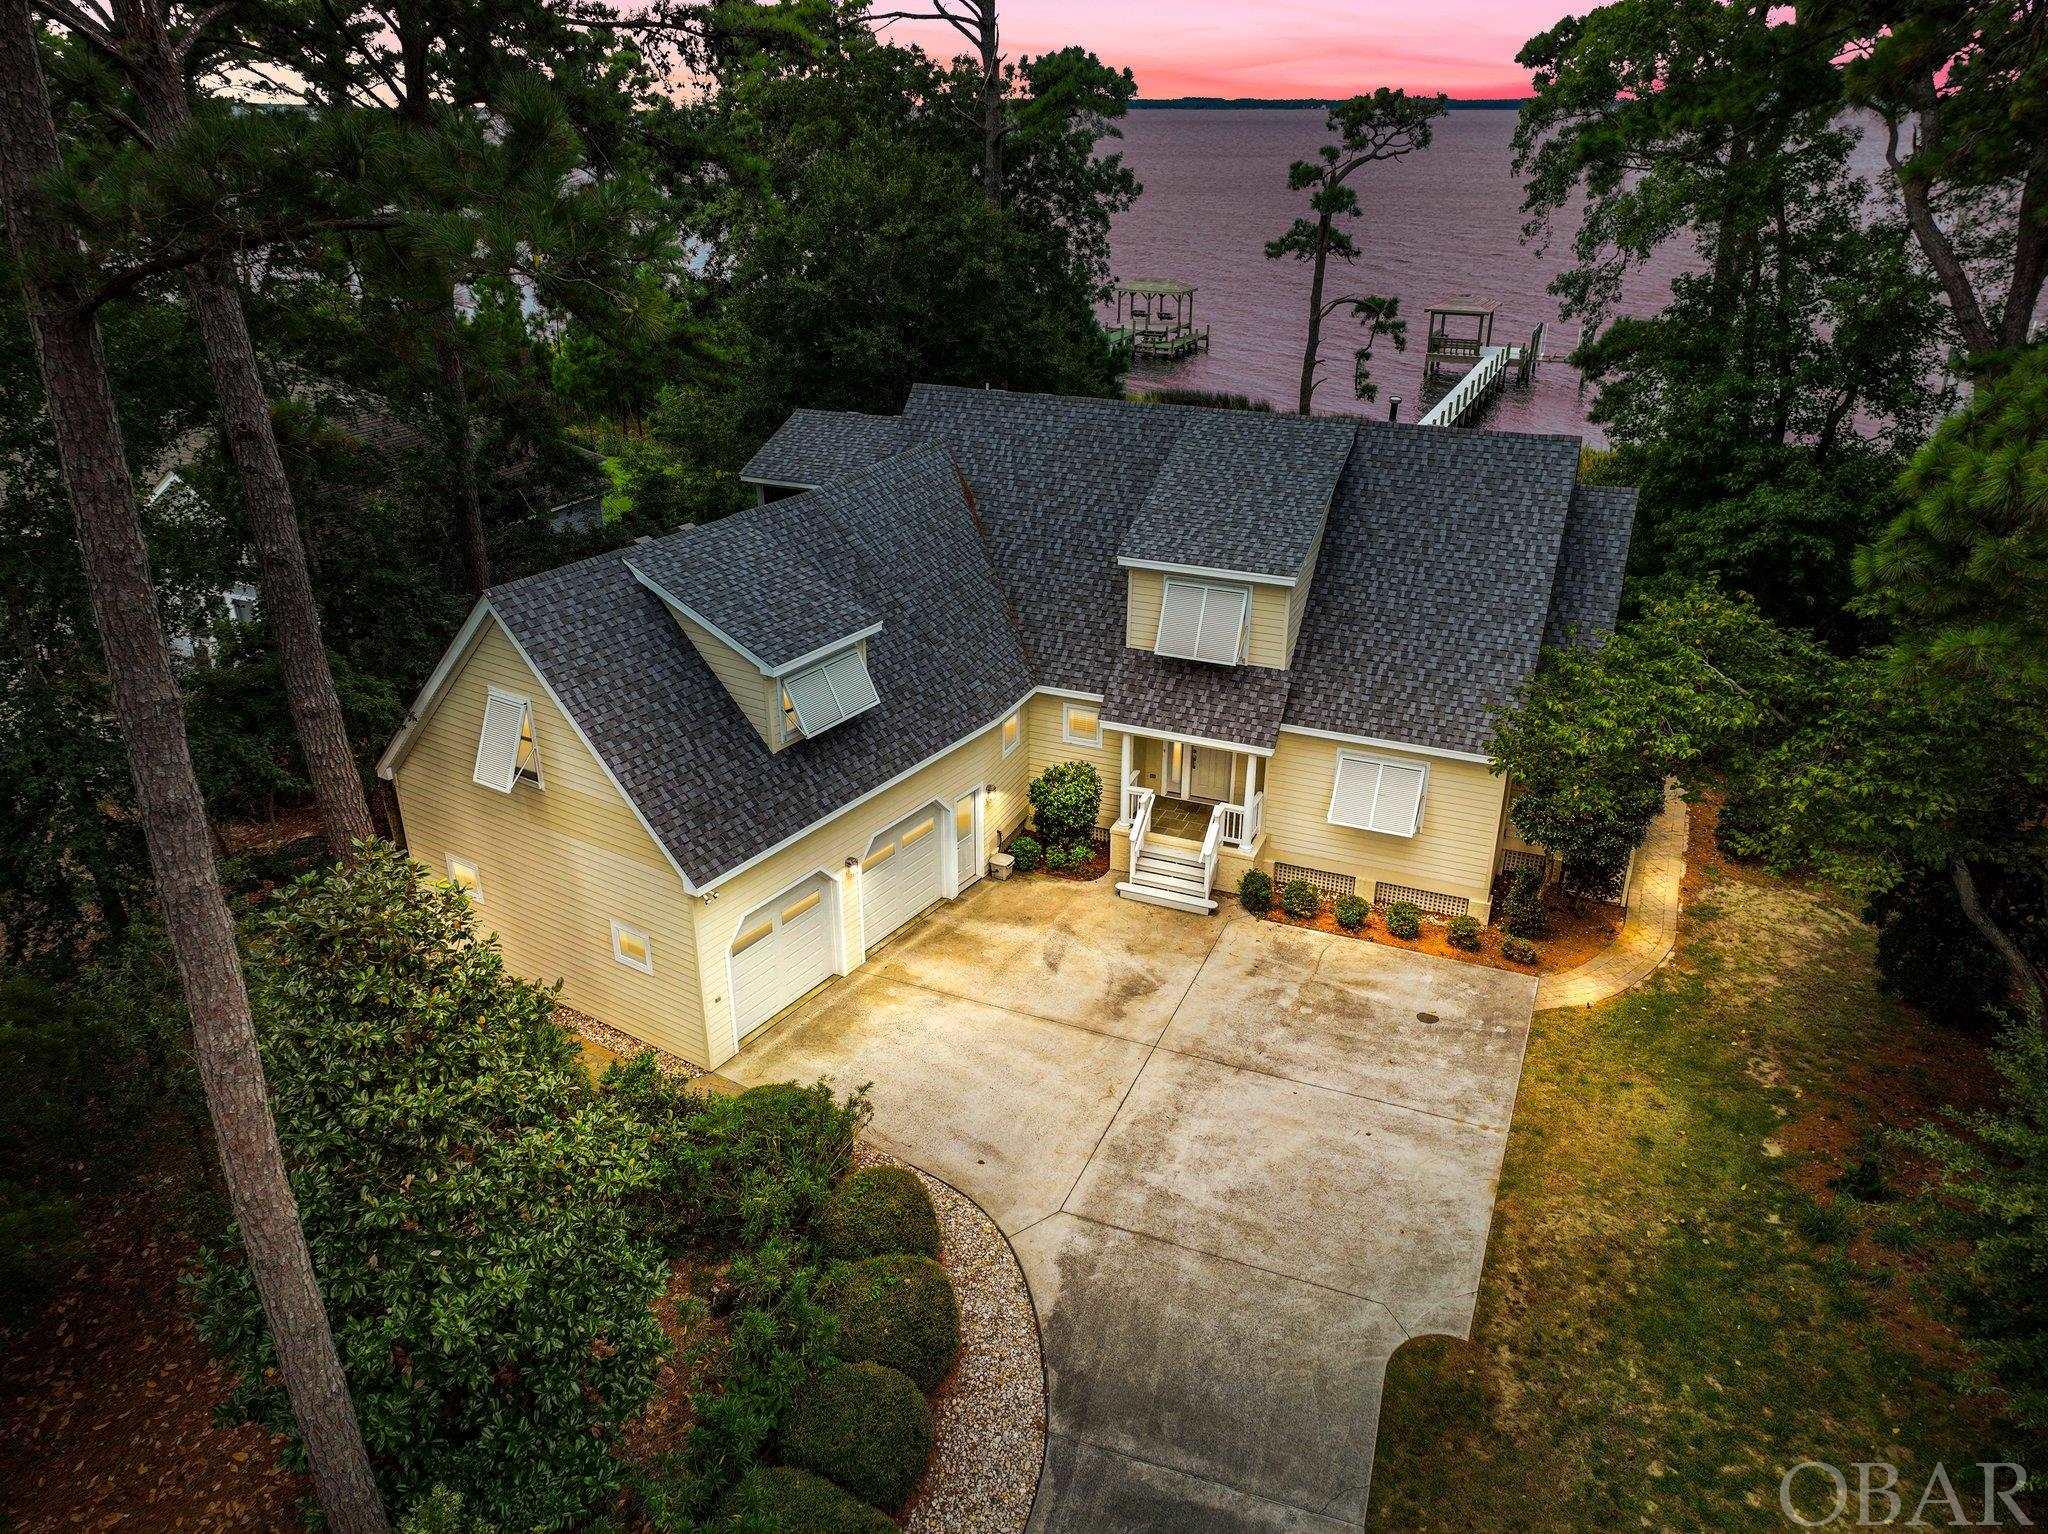 Coastal living at its finest. A 4 bedroom, 3 full bath, 2 half bath coastal home tastefully renovated and cared for in the secure enclave of Martin's Point. On the first floor you find expansive windows overlooking the Currituck sound inviting the outdoors in to your comfortable living room with vaulted ceilings & a gas fireplace, custom kitchen, dining area, sunroom, laundry room, primary bedroom suite and two car garage. Upstairs we follow the catwalk to a finished room over the garage with private bath, a guest bedroom with private access to the screened porch, and a third bedroom currently setup as an office with a private half bath. Outdoor space includes a sun deck with retractable awning that seamlessly flows to the outdoor fire pit, grill area, and private dock with gazebo. Take in the awe-inspiring, unobstructed water views and sunsets daily. Access to the sound, a secure community and home designed for entertaining, make this private oasis a distinctive opportunity to live the unique Outer Banks lifestyle.